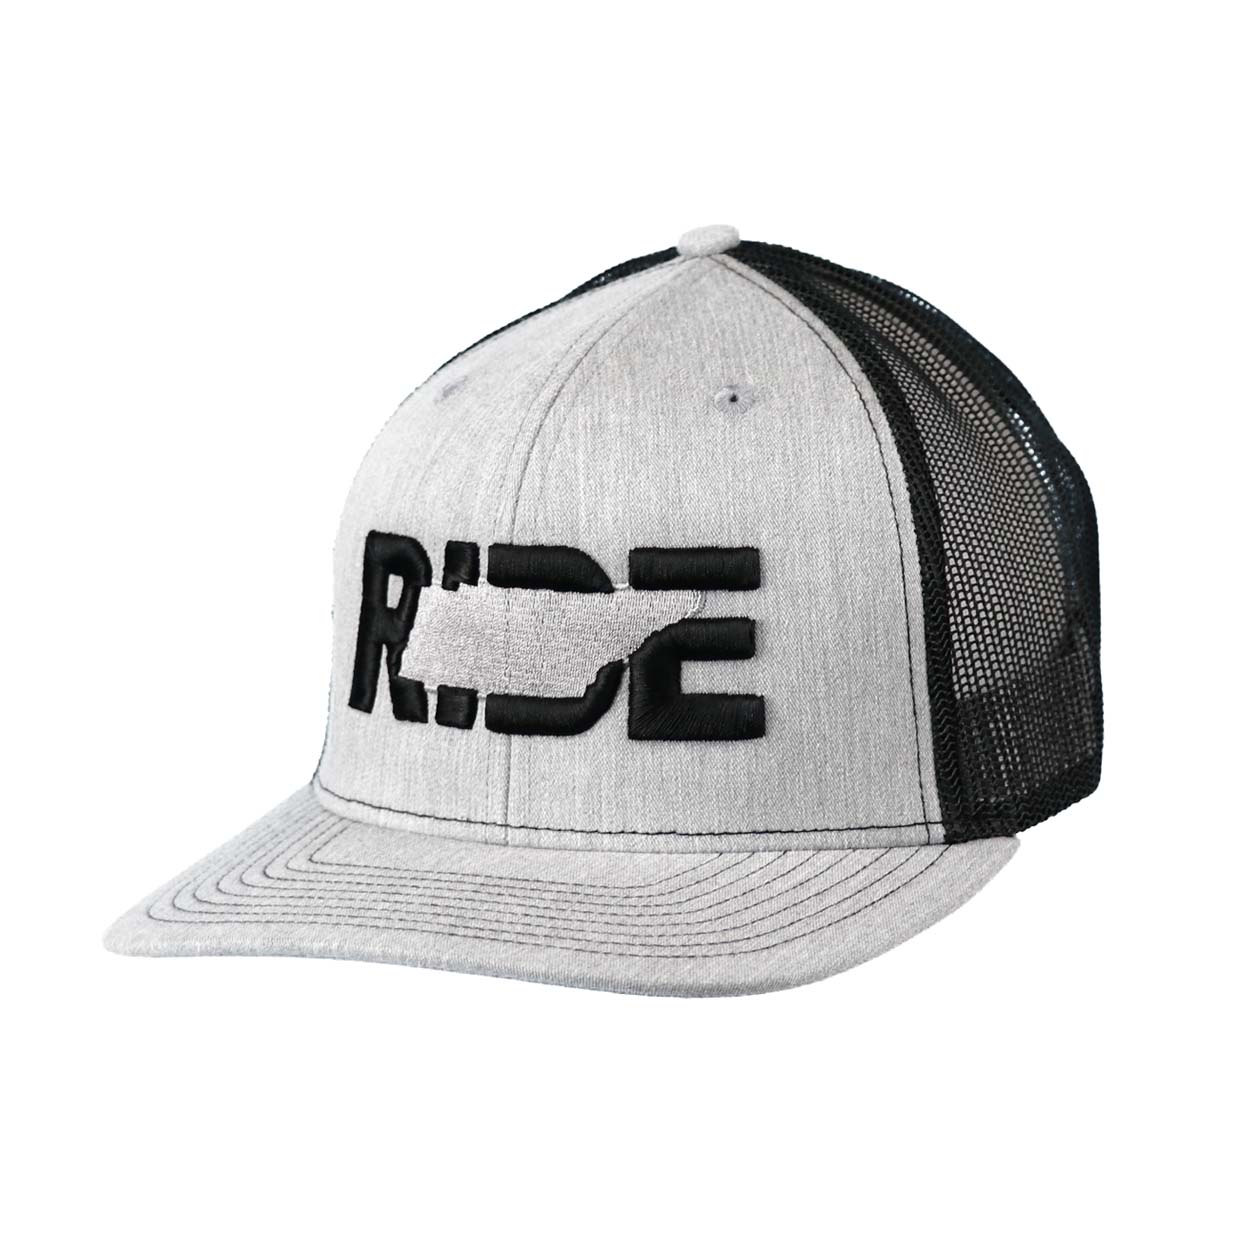 Ride Tennessee Classic Pro 3D Puff Embroidered Snapback Trucker Hat Heather Gray/Black